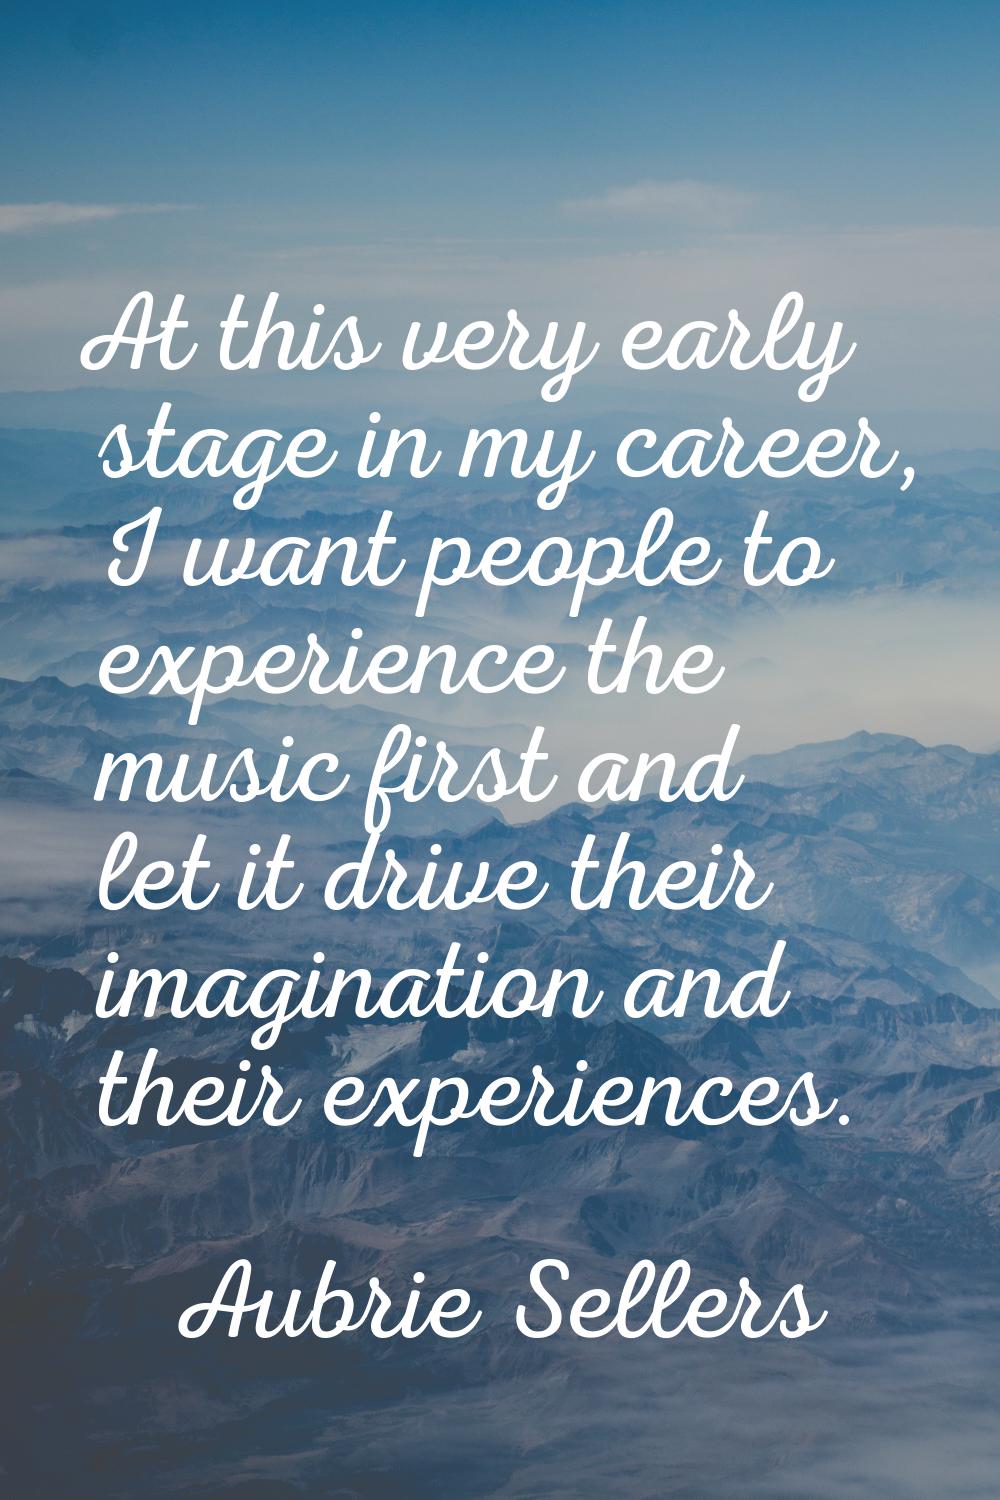 At this very early stage in my career, I want people to experience the music first and let it drive